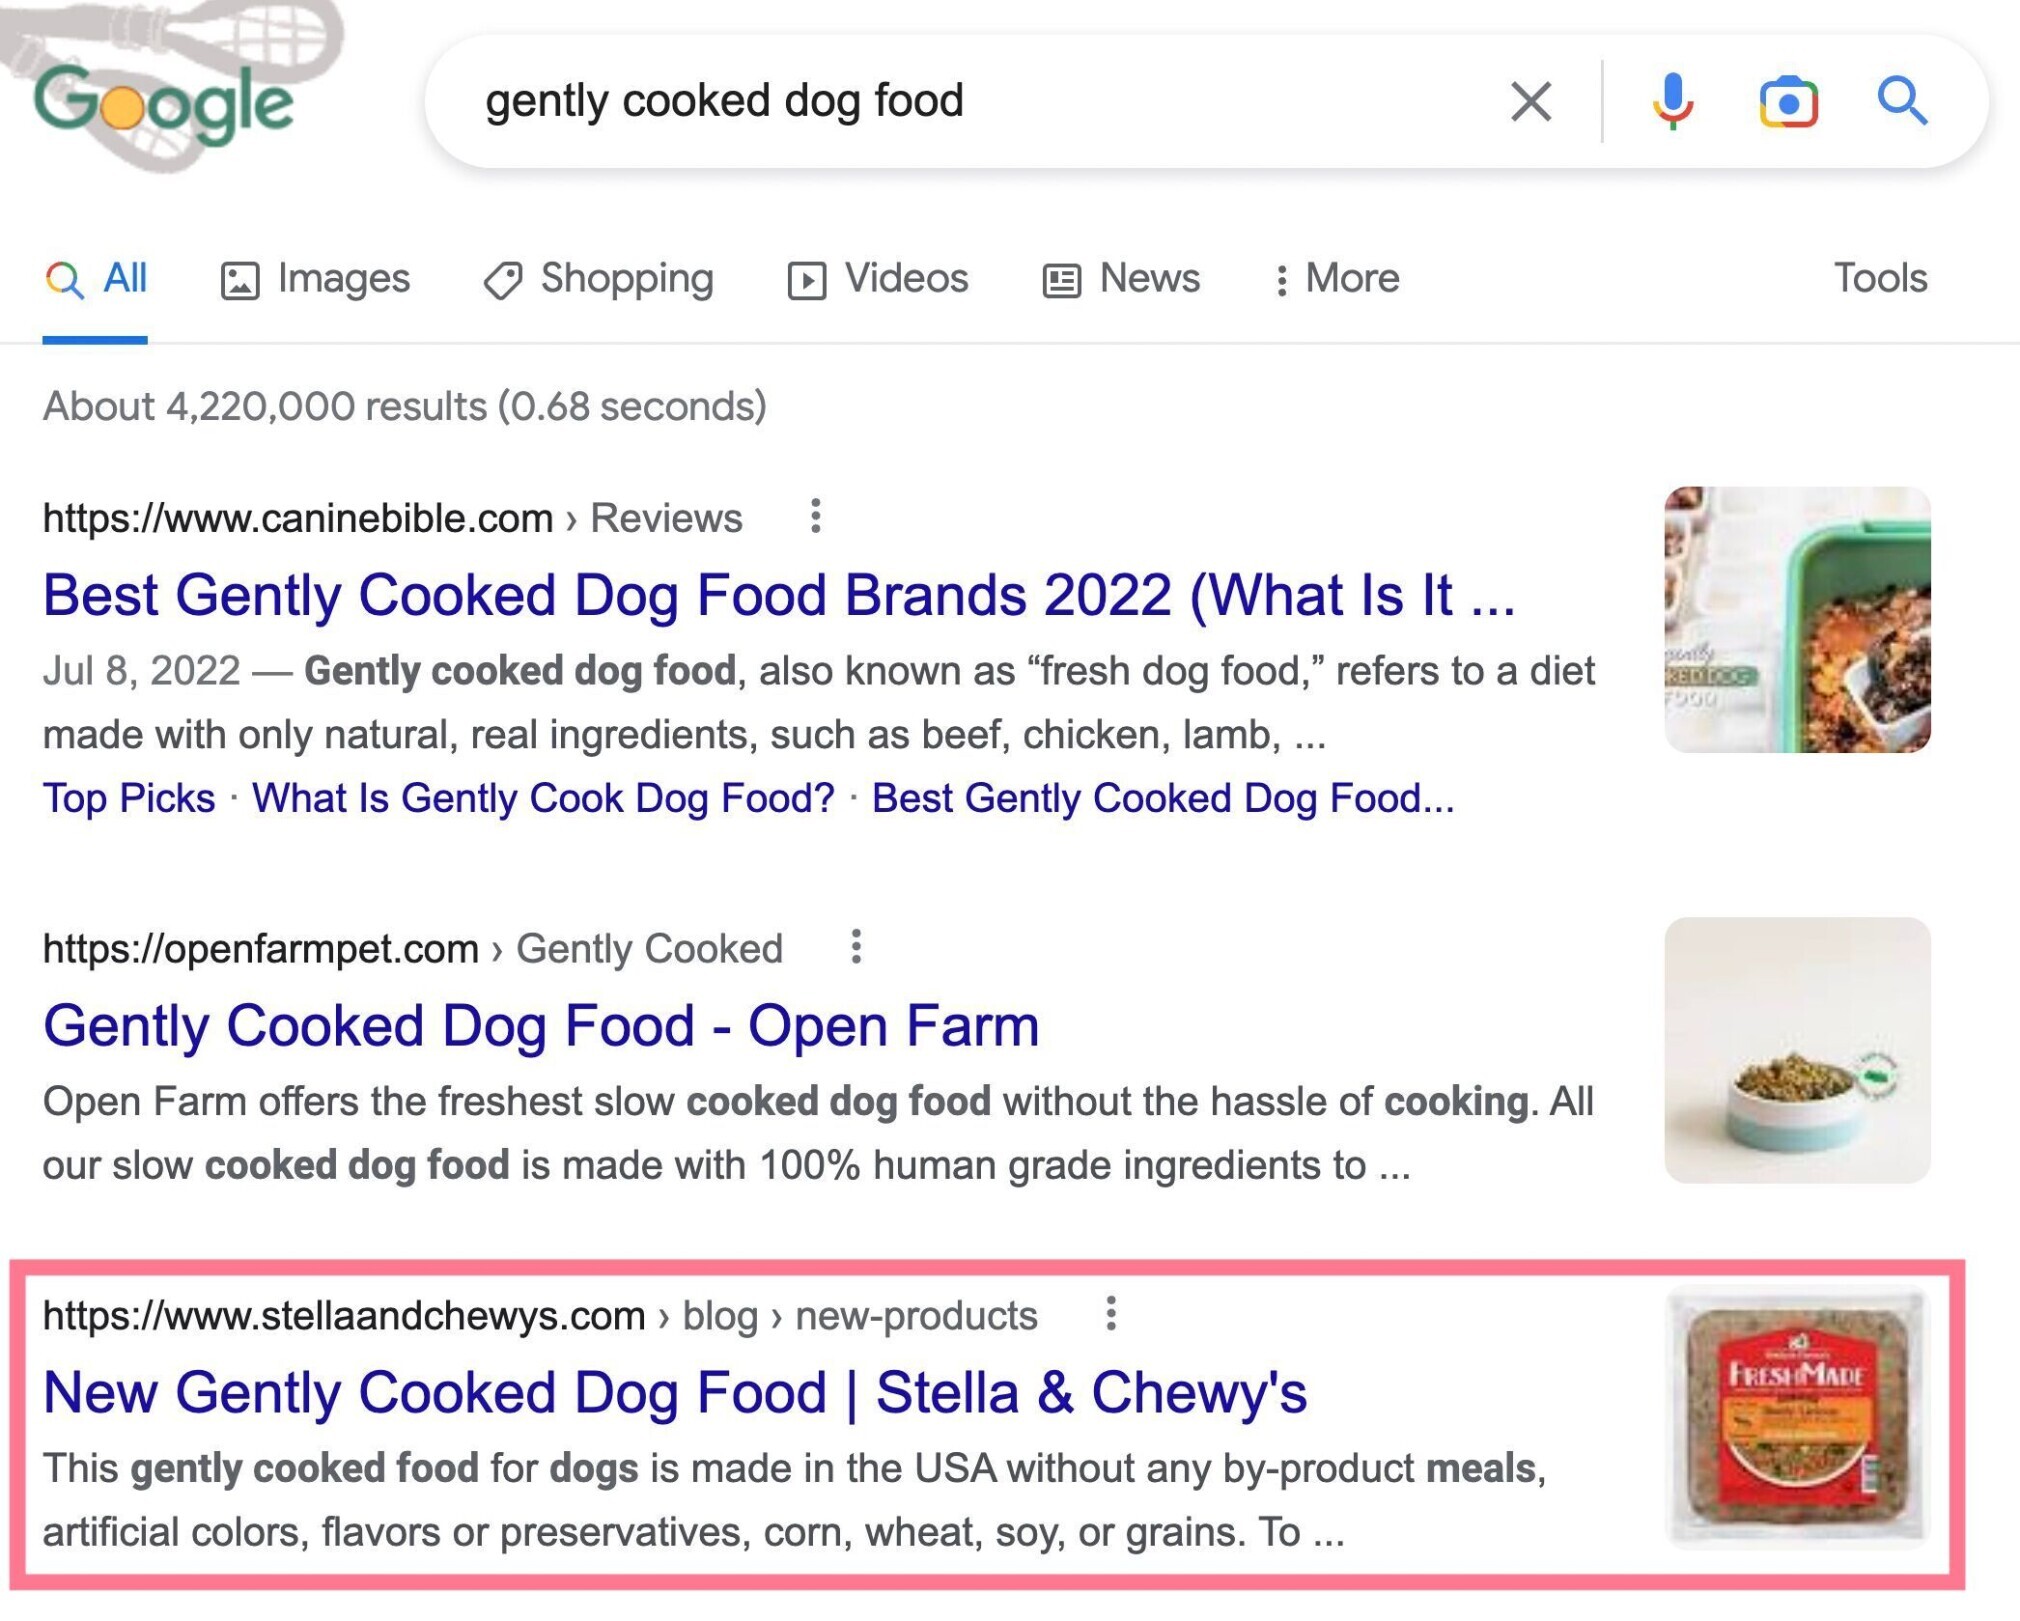 Stella & Chewy's blog post ranks #3 for "gently-cooked dog food"